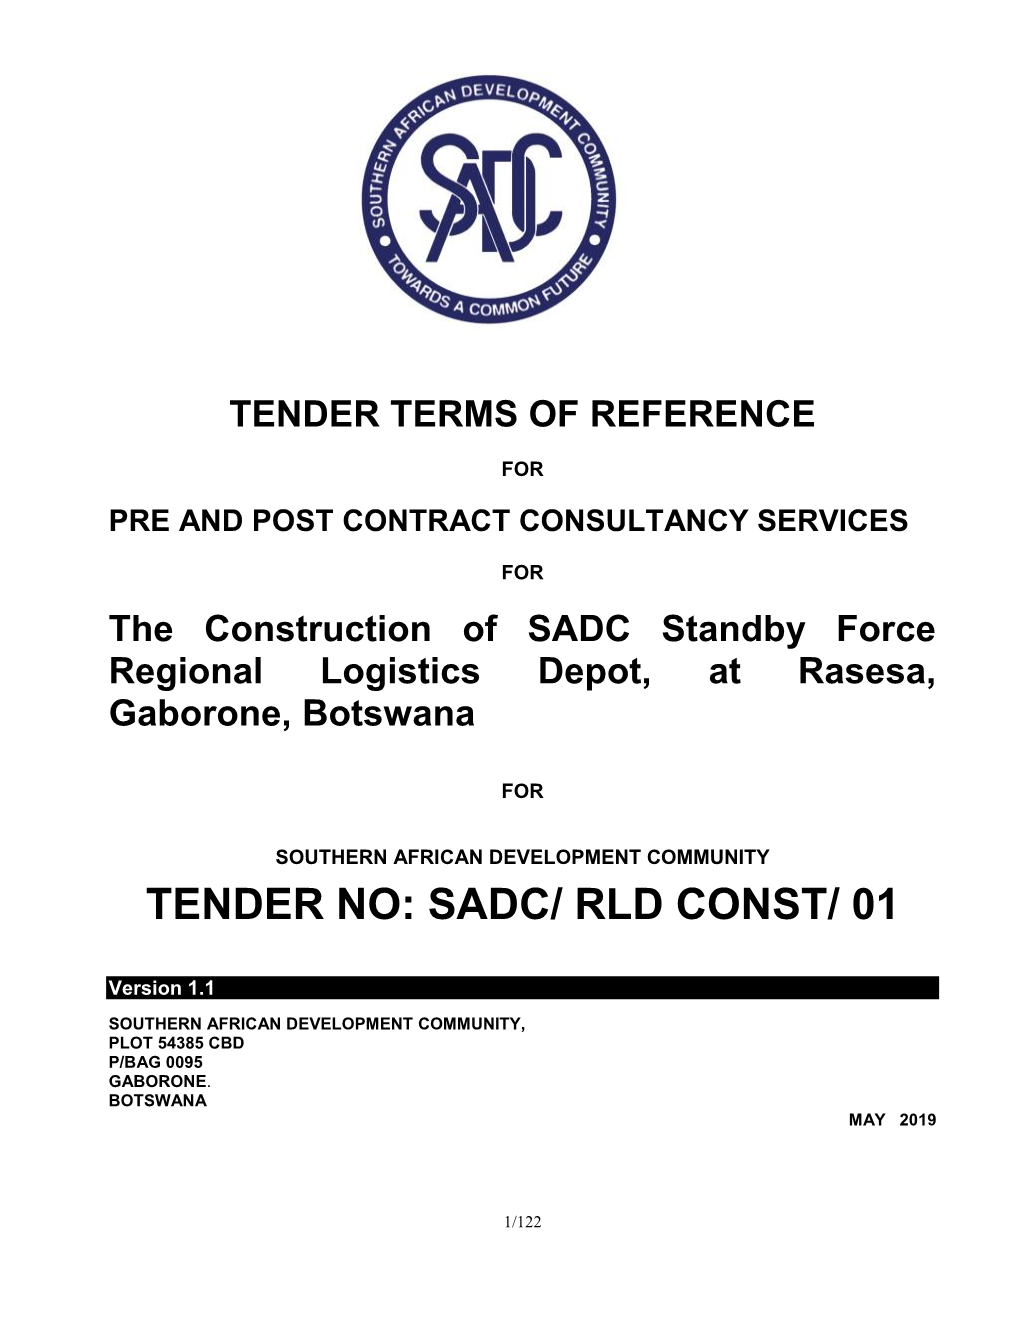 Tender Terms of Reference